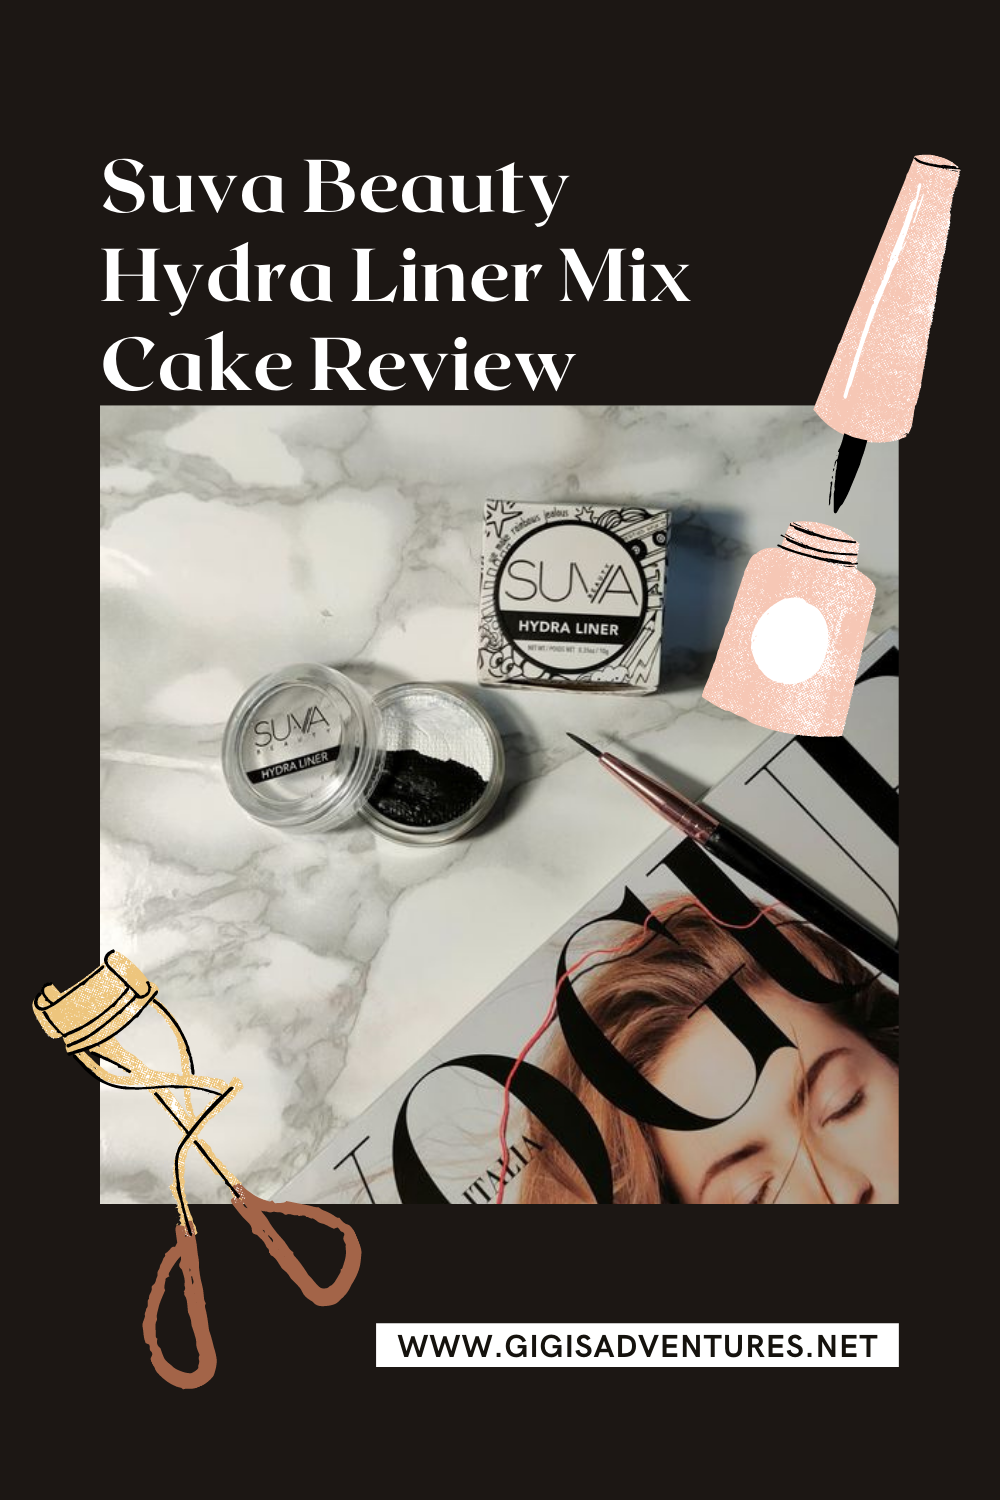 Suva Beauty Hydra Liner Mix Cake Review - Water Activated Eyeliner?!